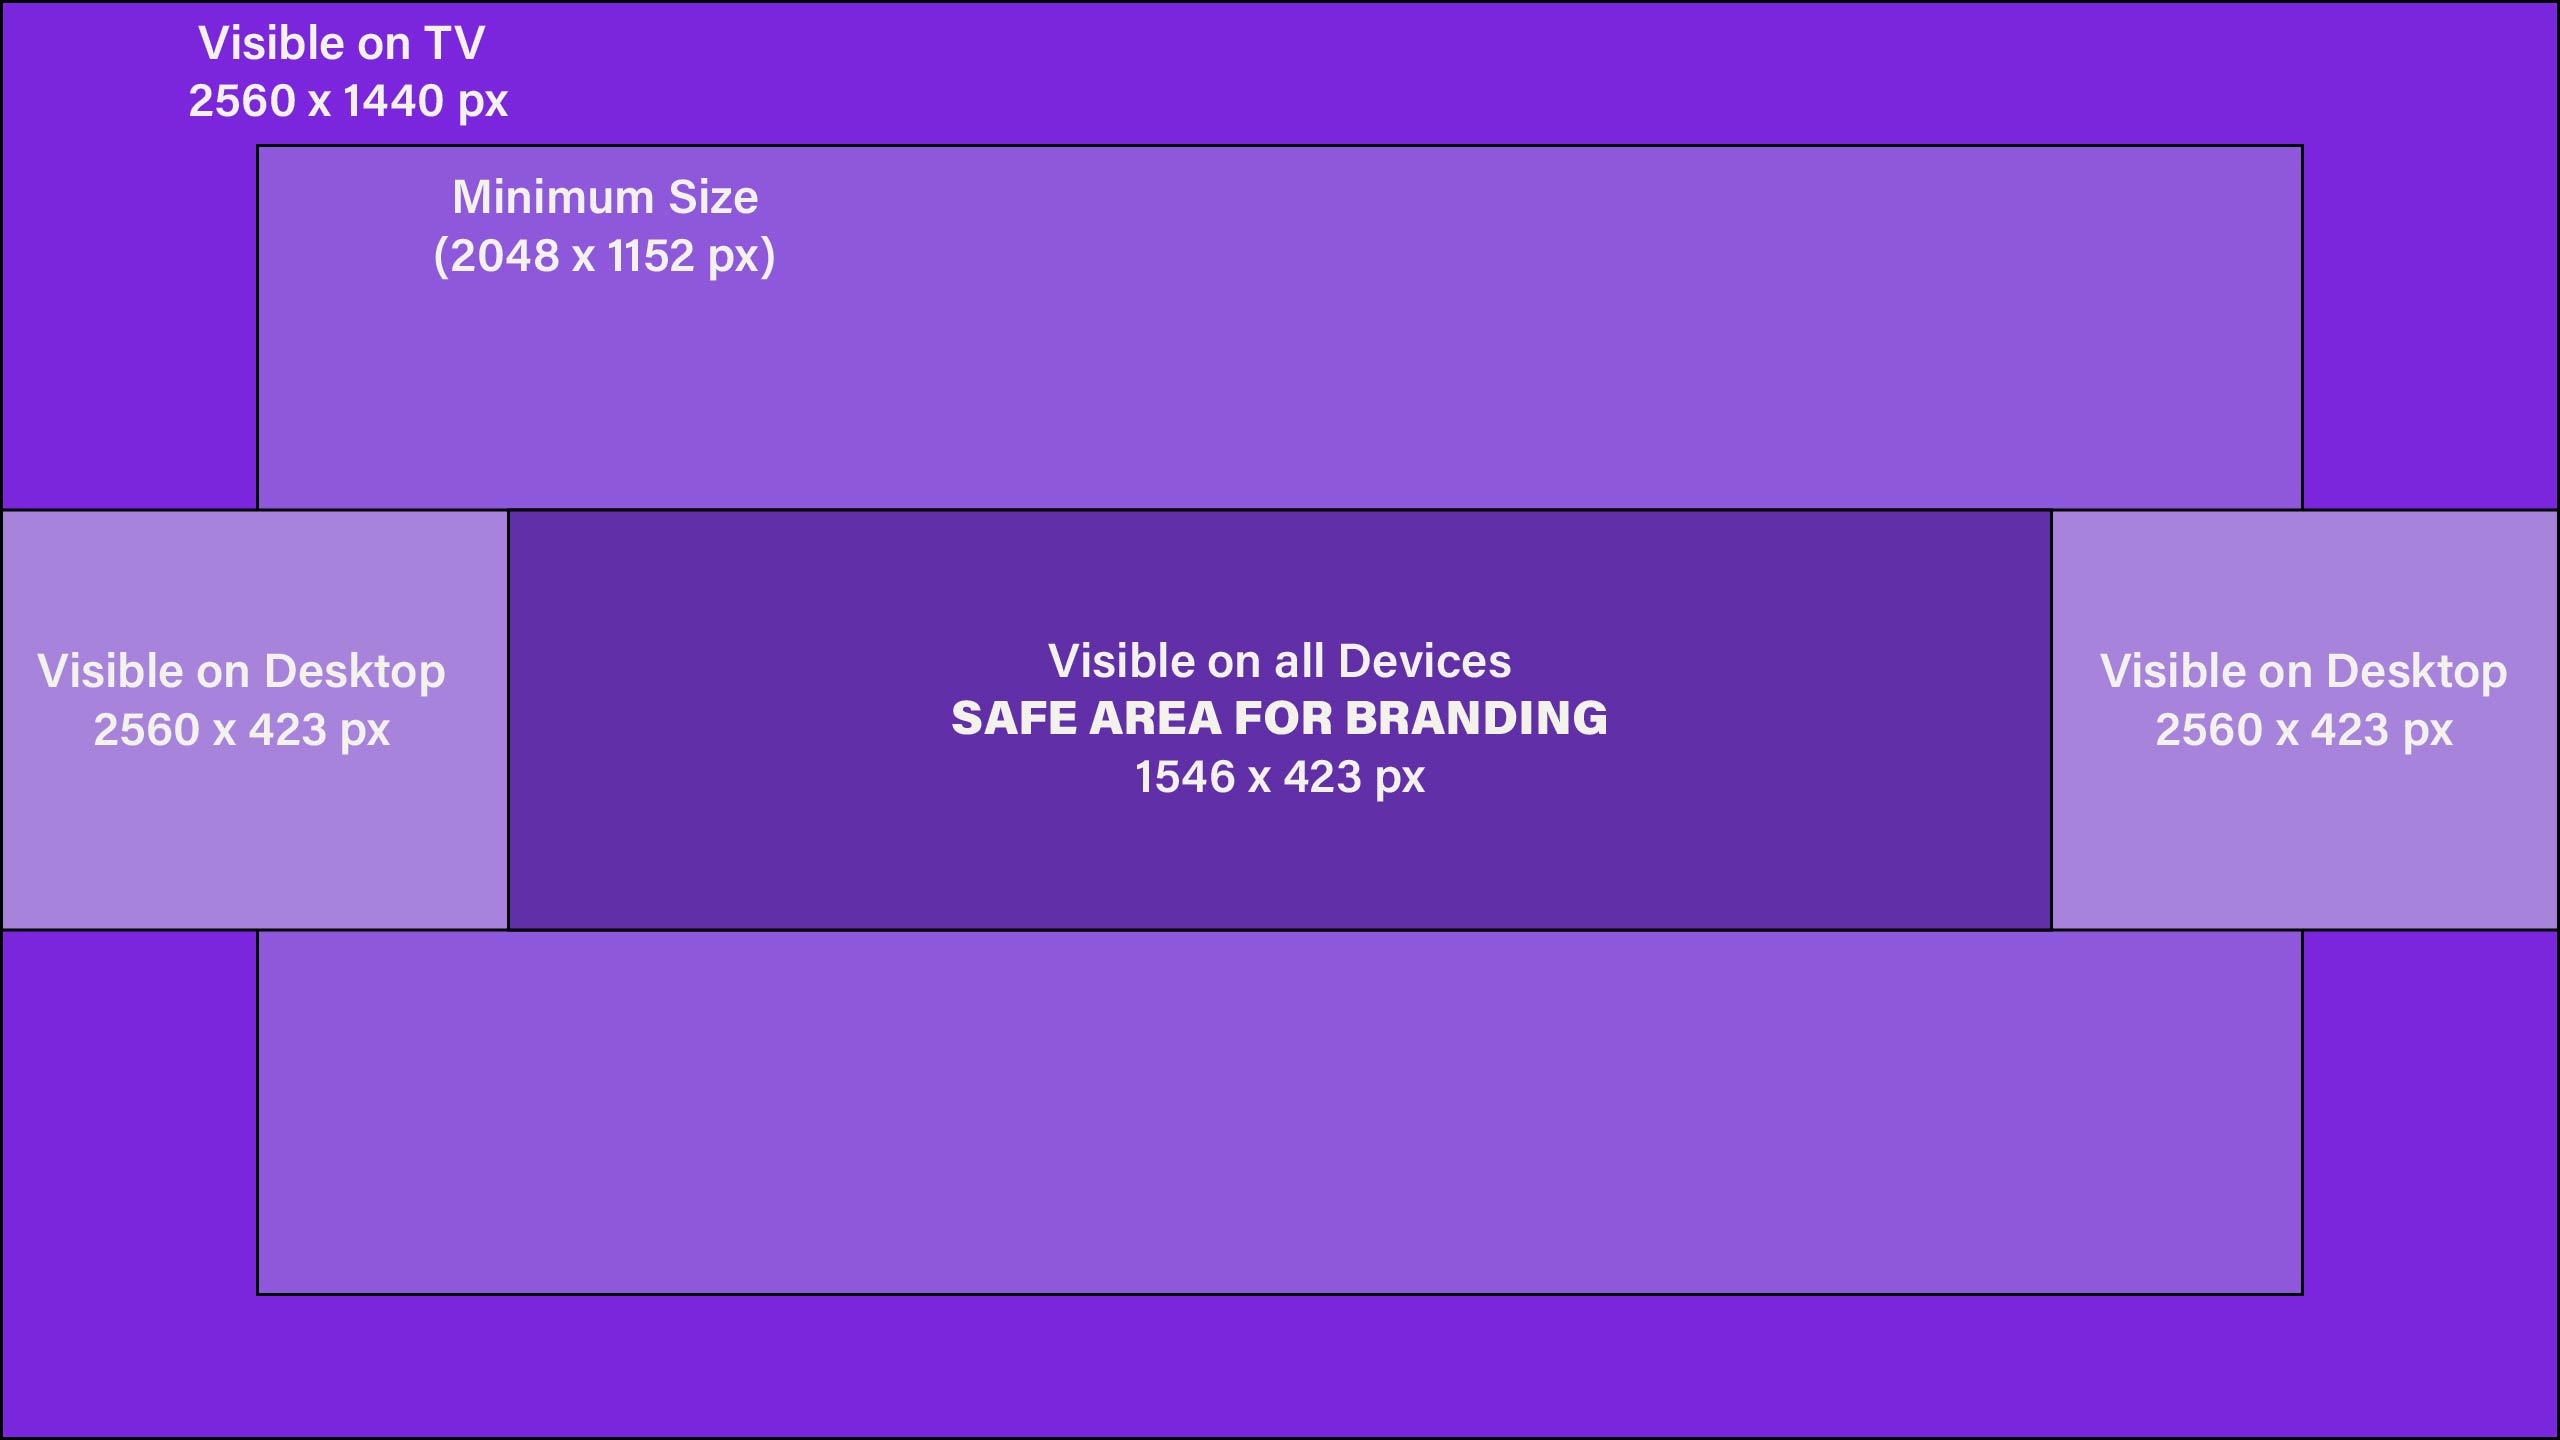 youtube banner size 2021